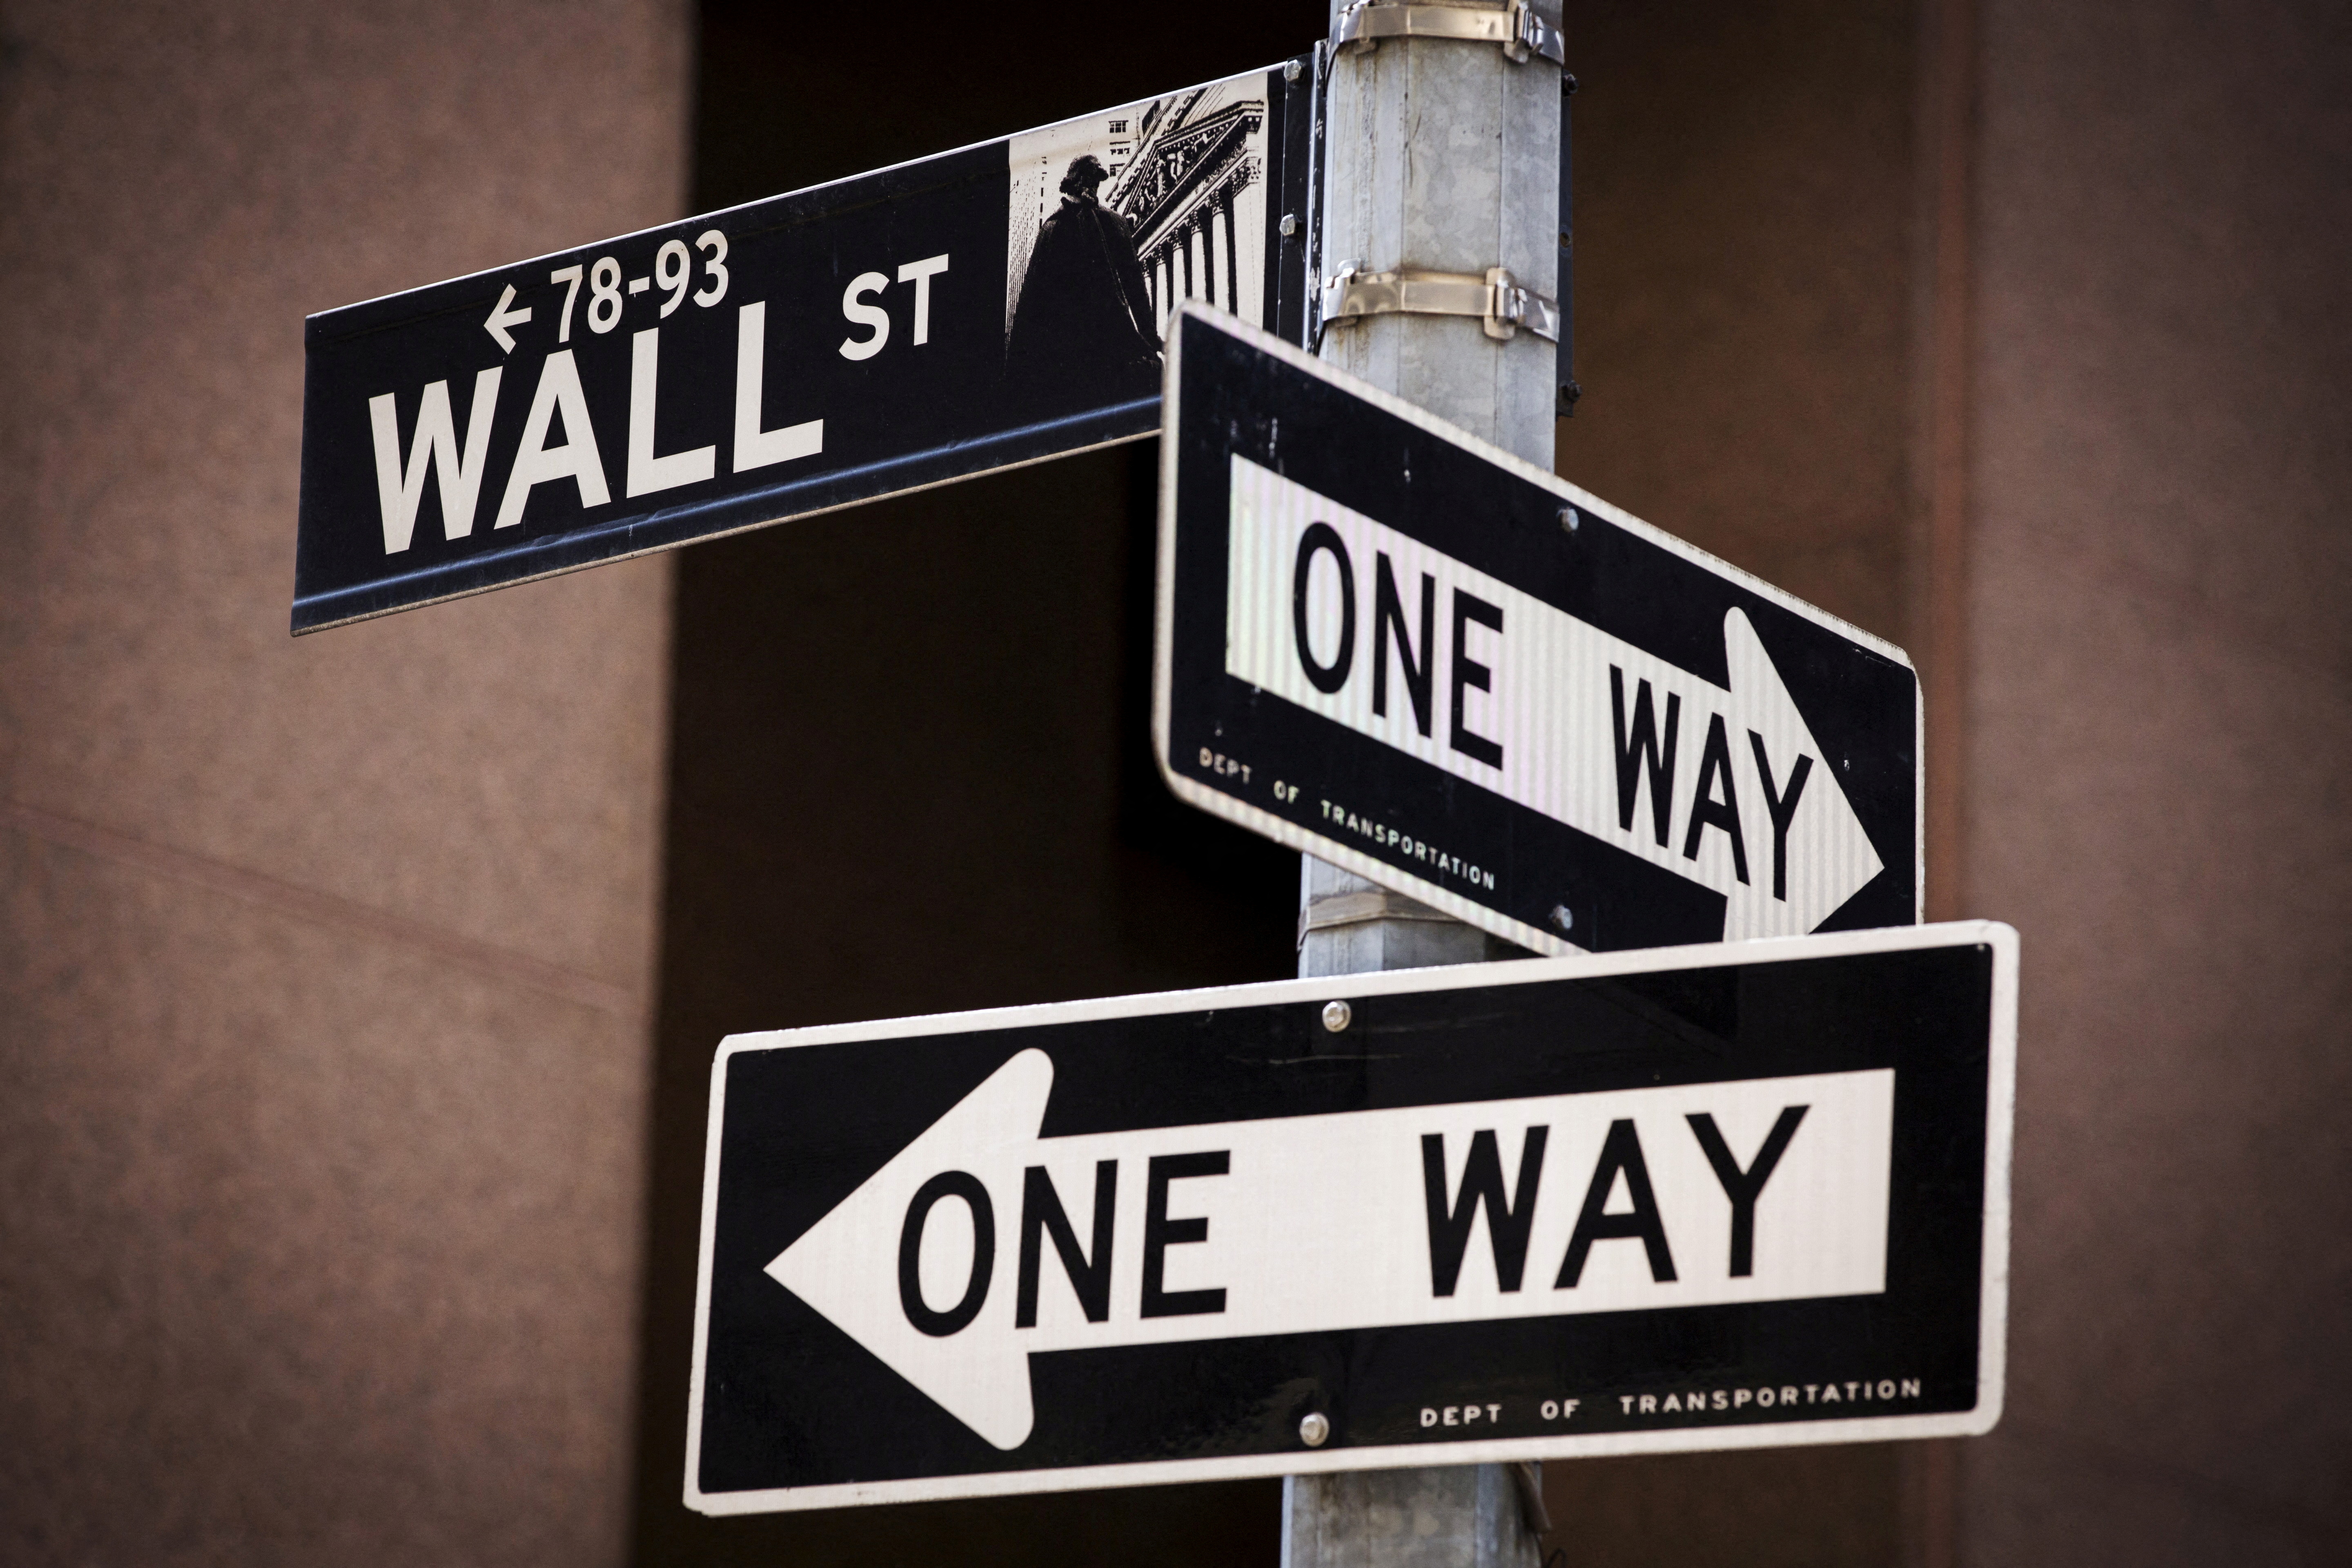 A 'Wall St' sign is seen above two 'One Way' signs in New York August 24, 2015. REUTERS/Lucas Jackson/File Photo